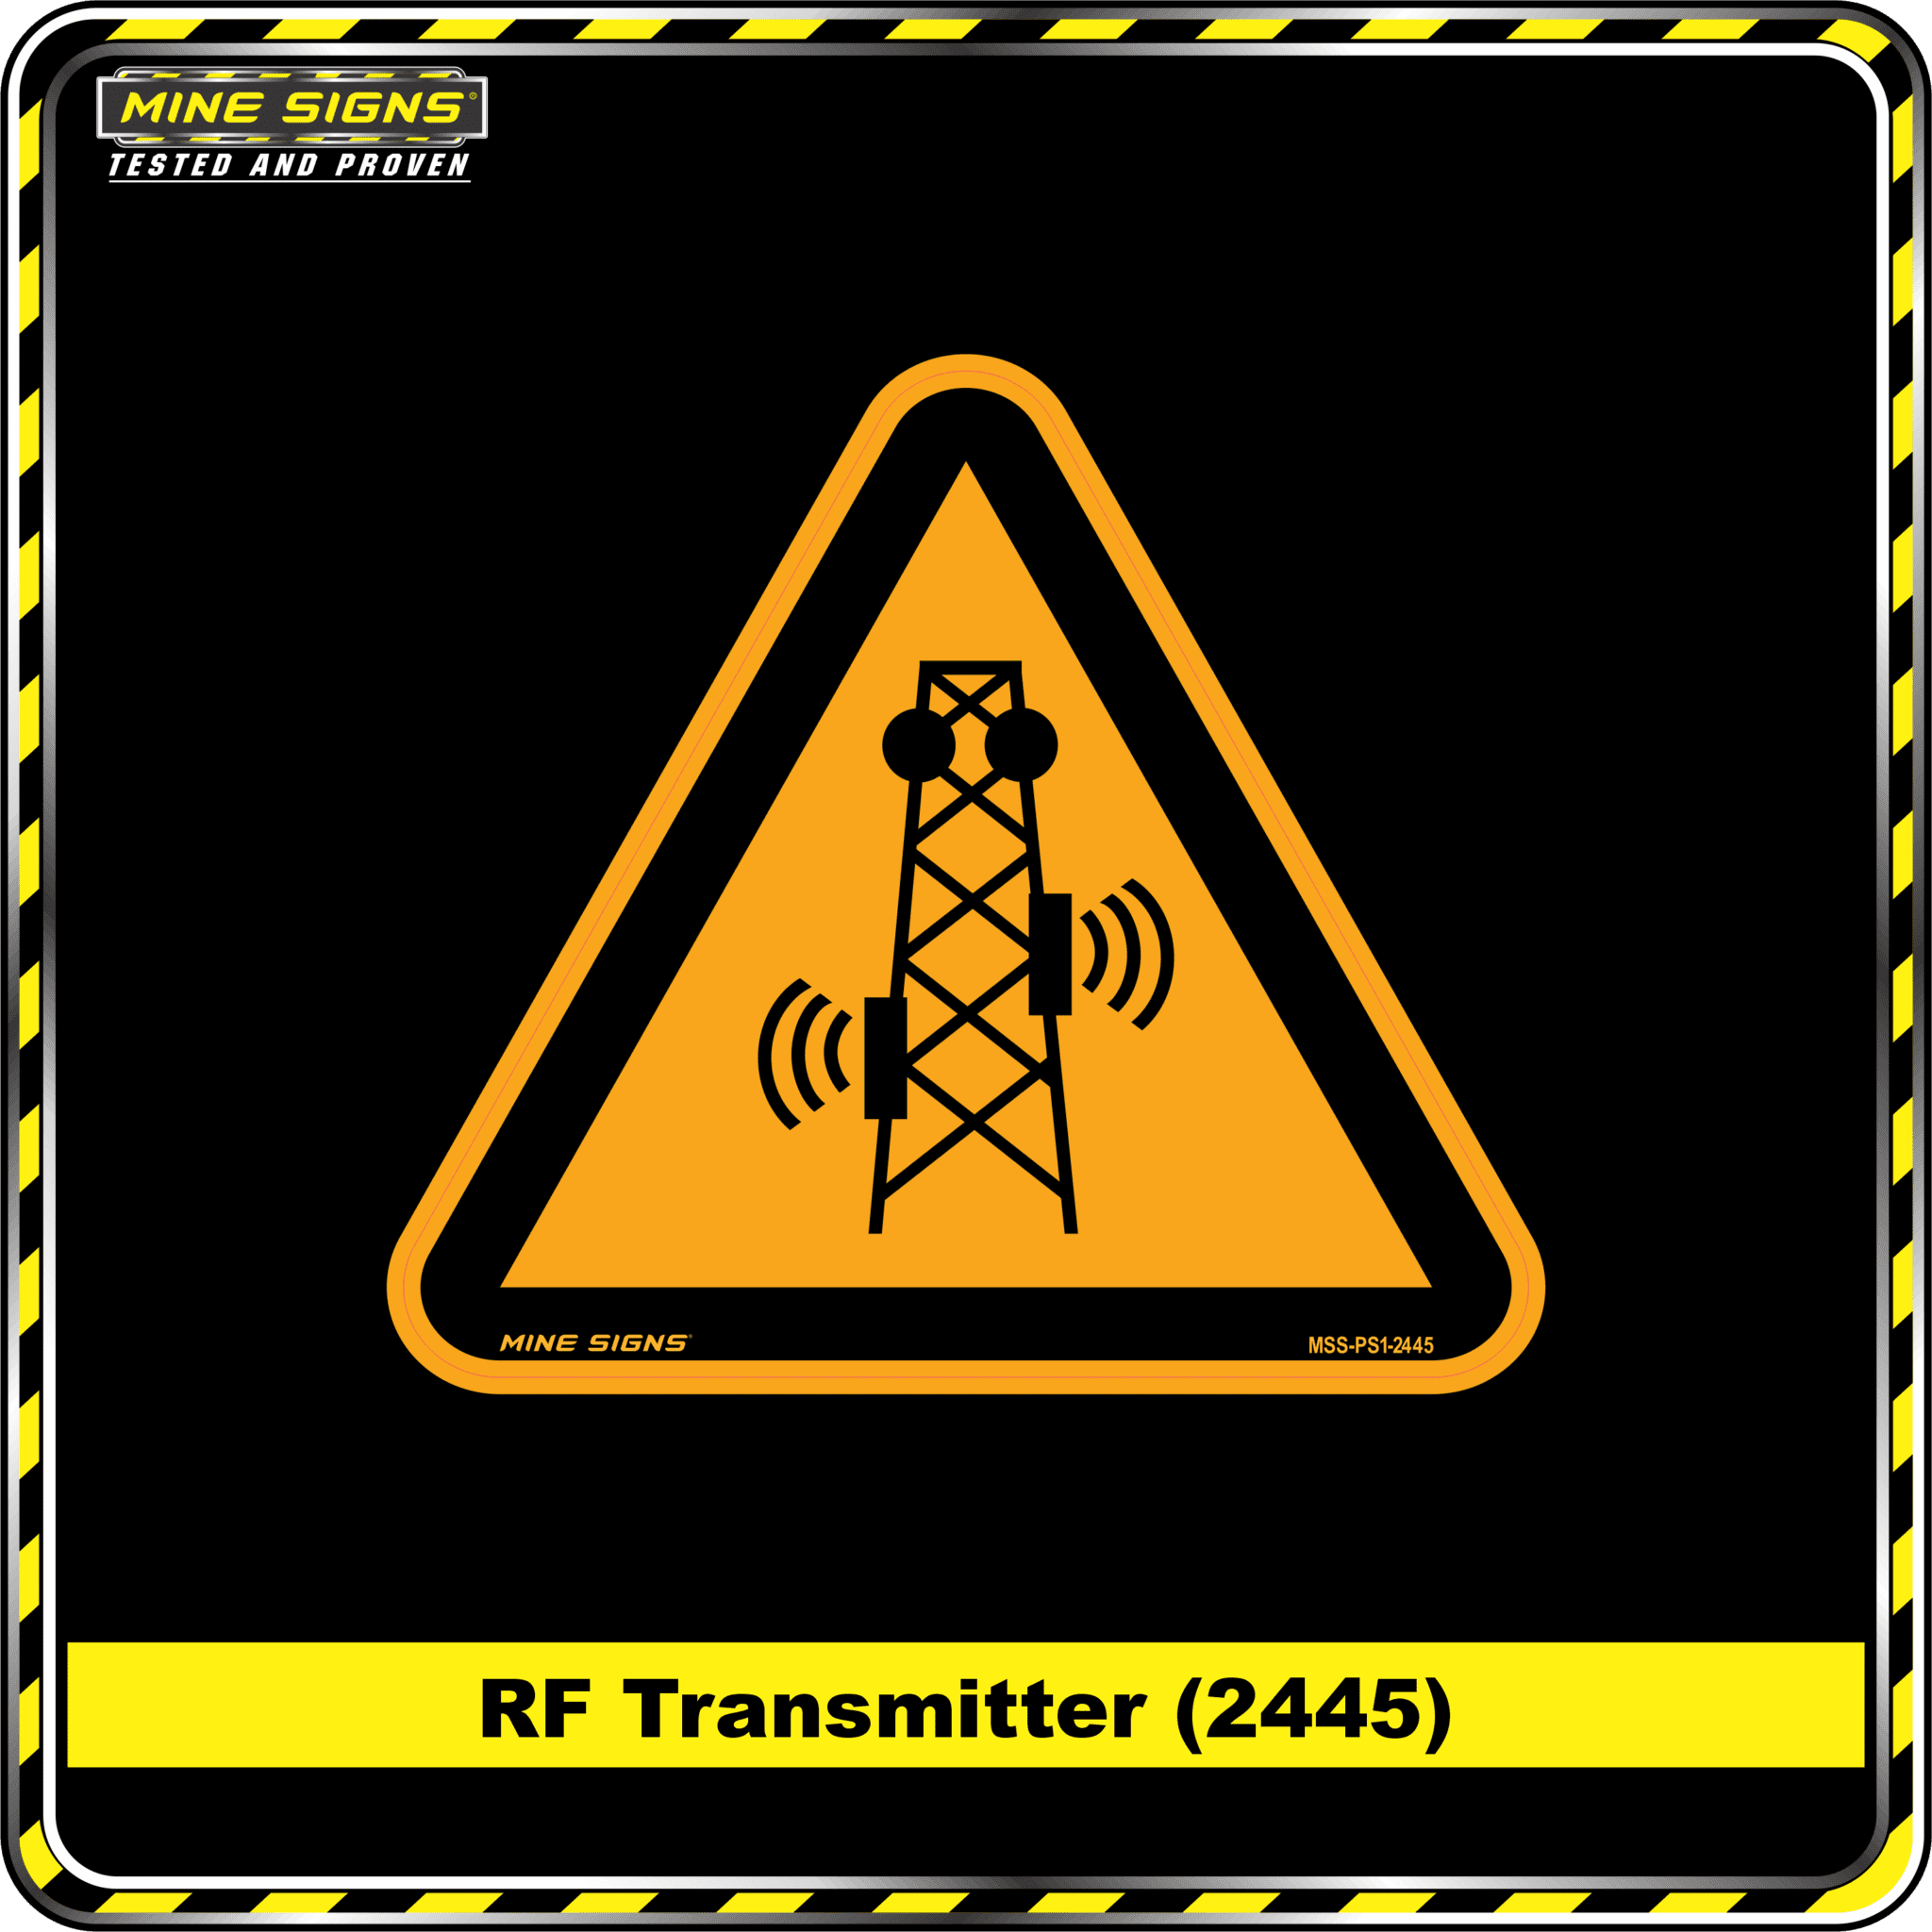 MS - Product Background - Safety Signs - RF Transmitter 2445